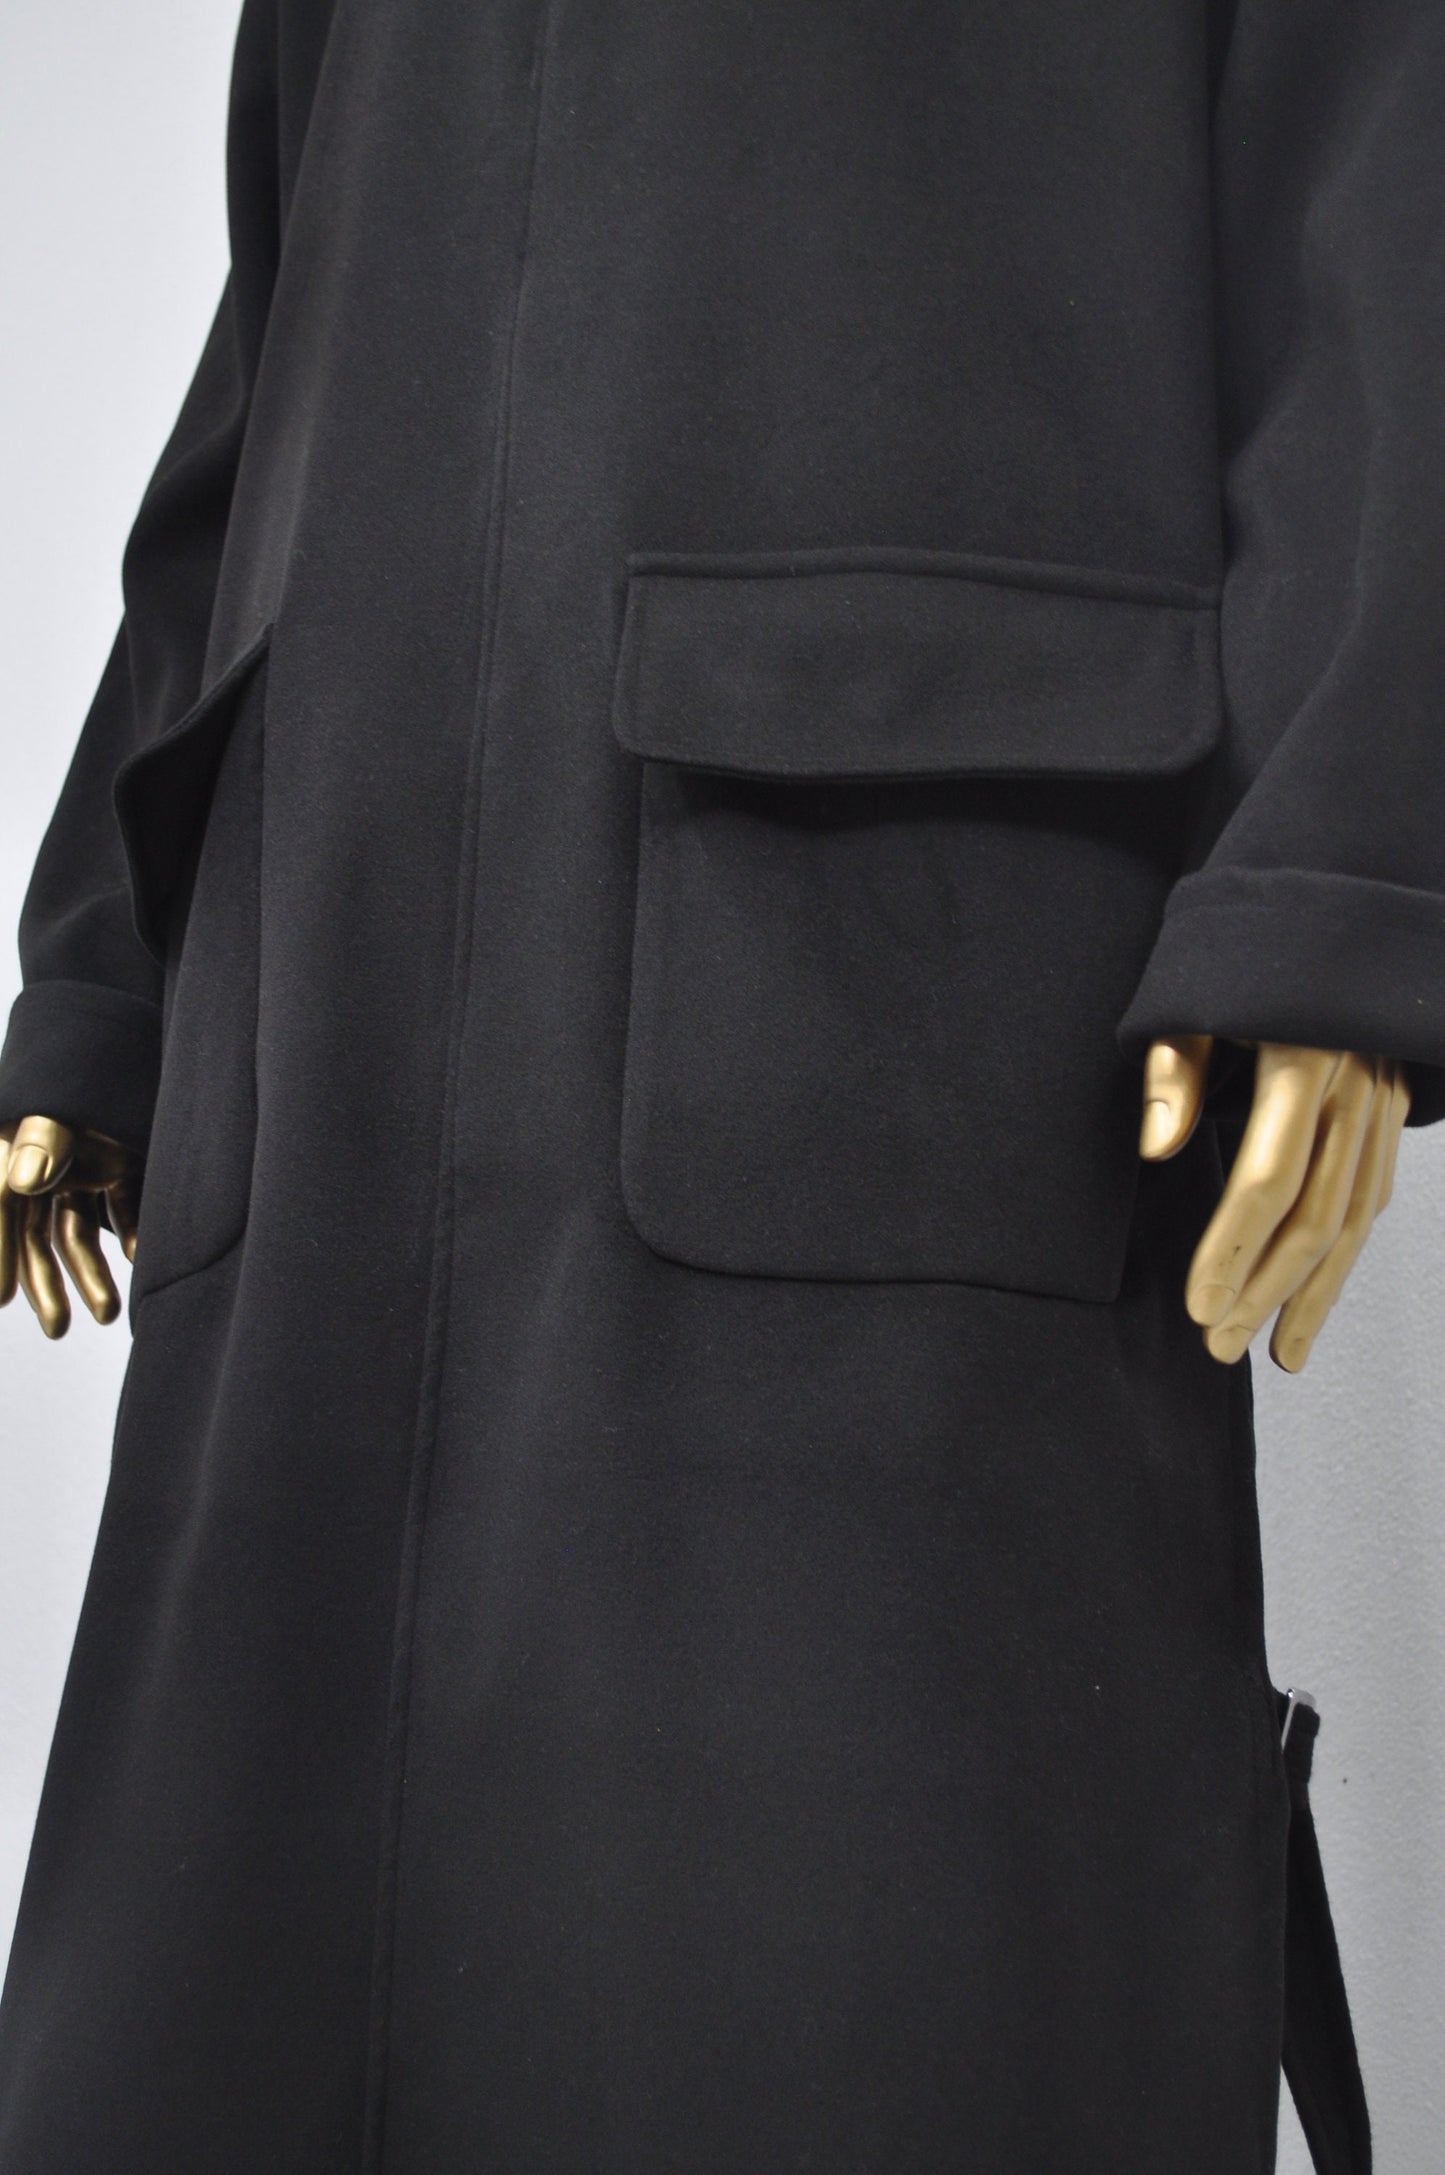 XS-8XL Leather Zip Collar Side Slit Wool Coat Dress/Unisex Long Outer,Cardigan Pancho JACKET,Goth,Punk Cosplay,Apocalyptic Dystopian-BB927